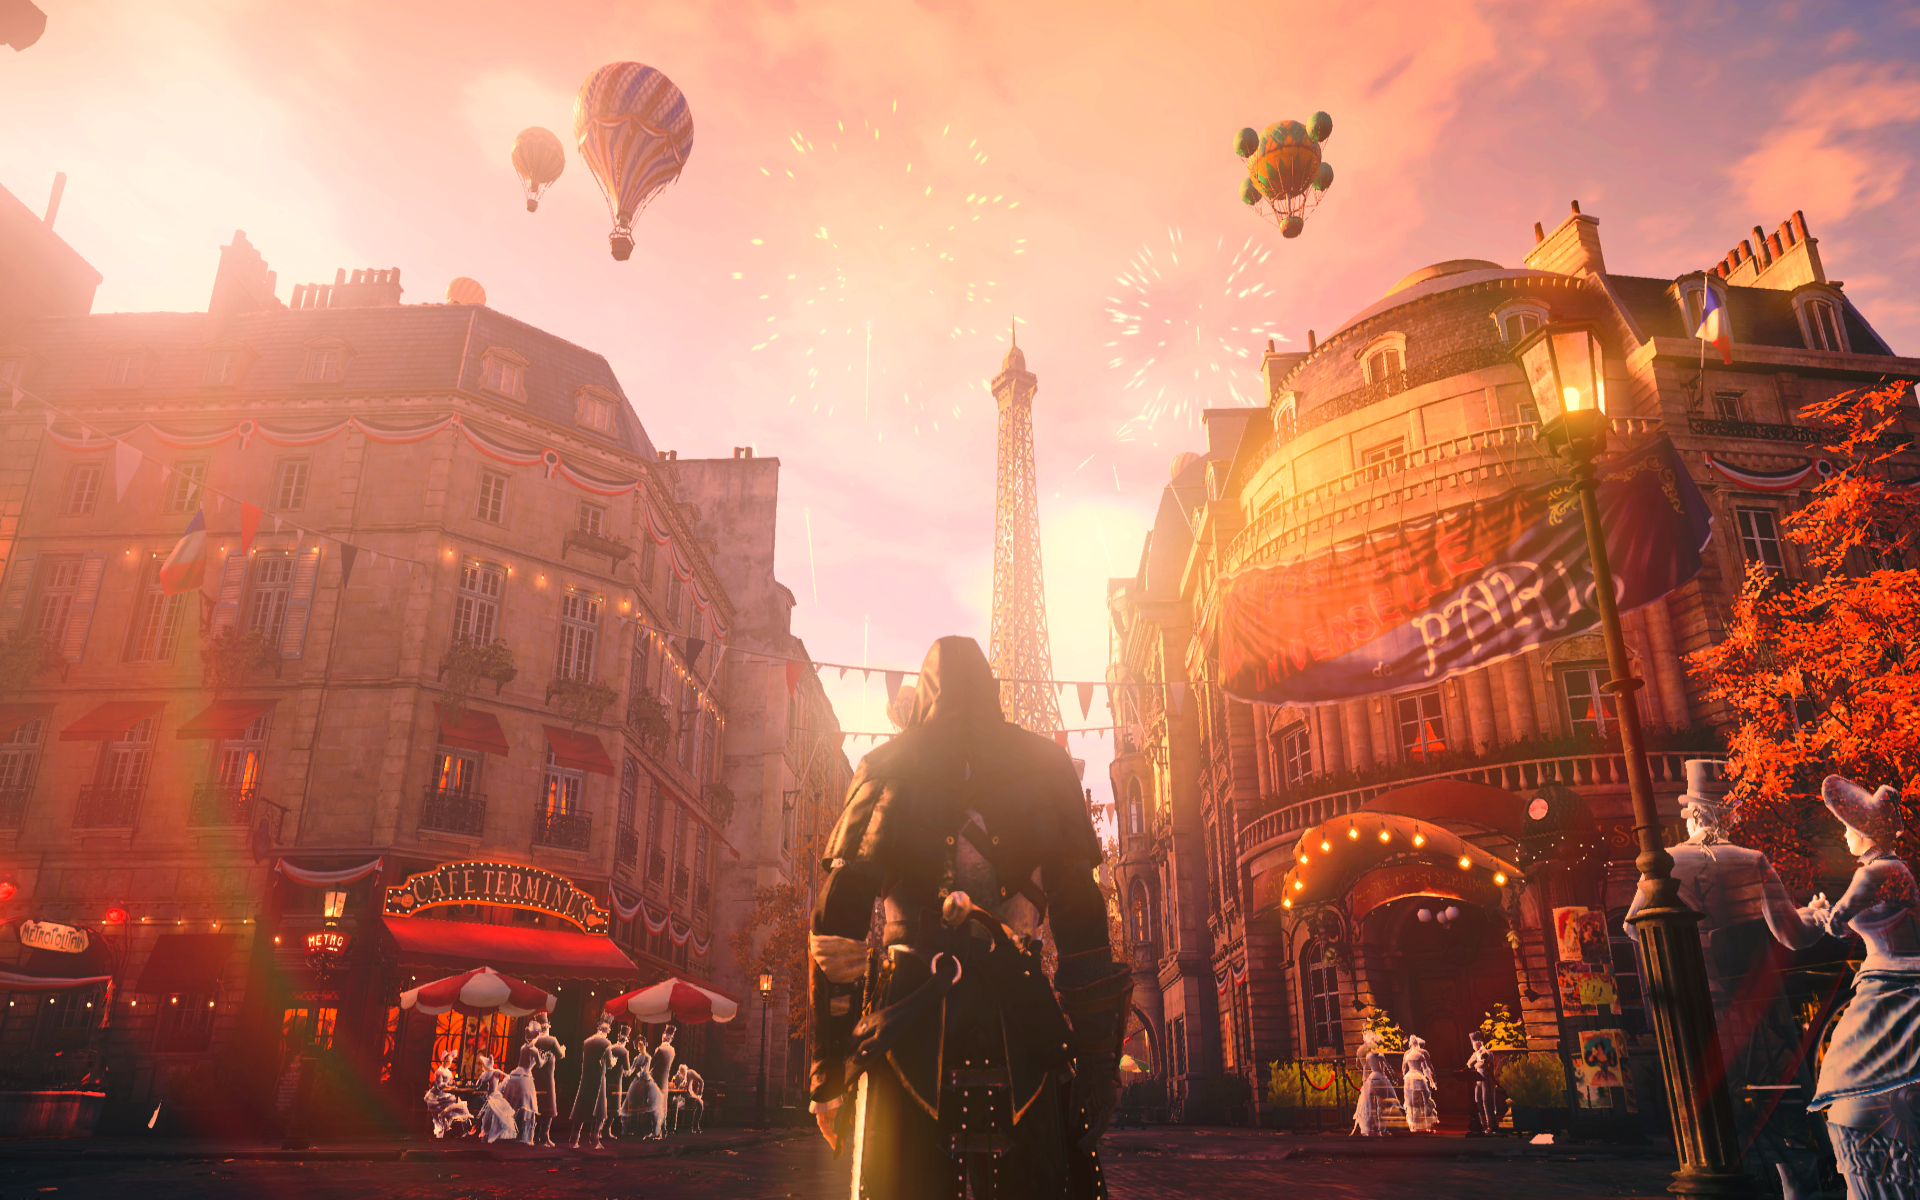 General 1920x1200 Assassin's Creed Unity Assassin's Creed Ubisoft video games building video game art screen shot sunset sunset glow hot air balloons clouds sunlight fireworks rainbows sky signs video game characters CGI